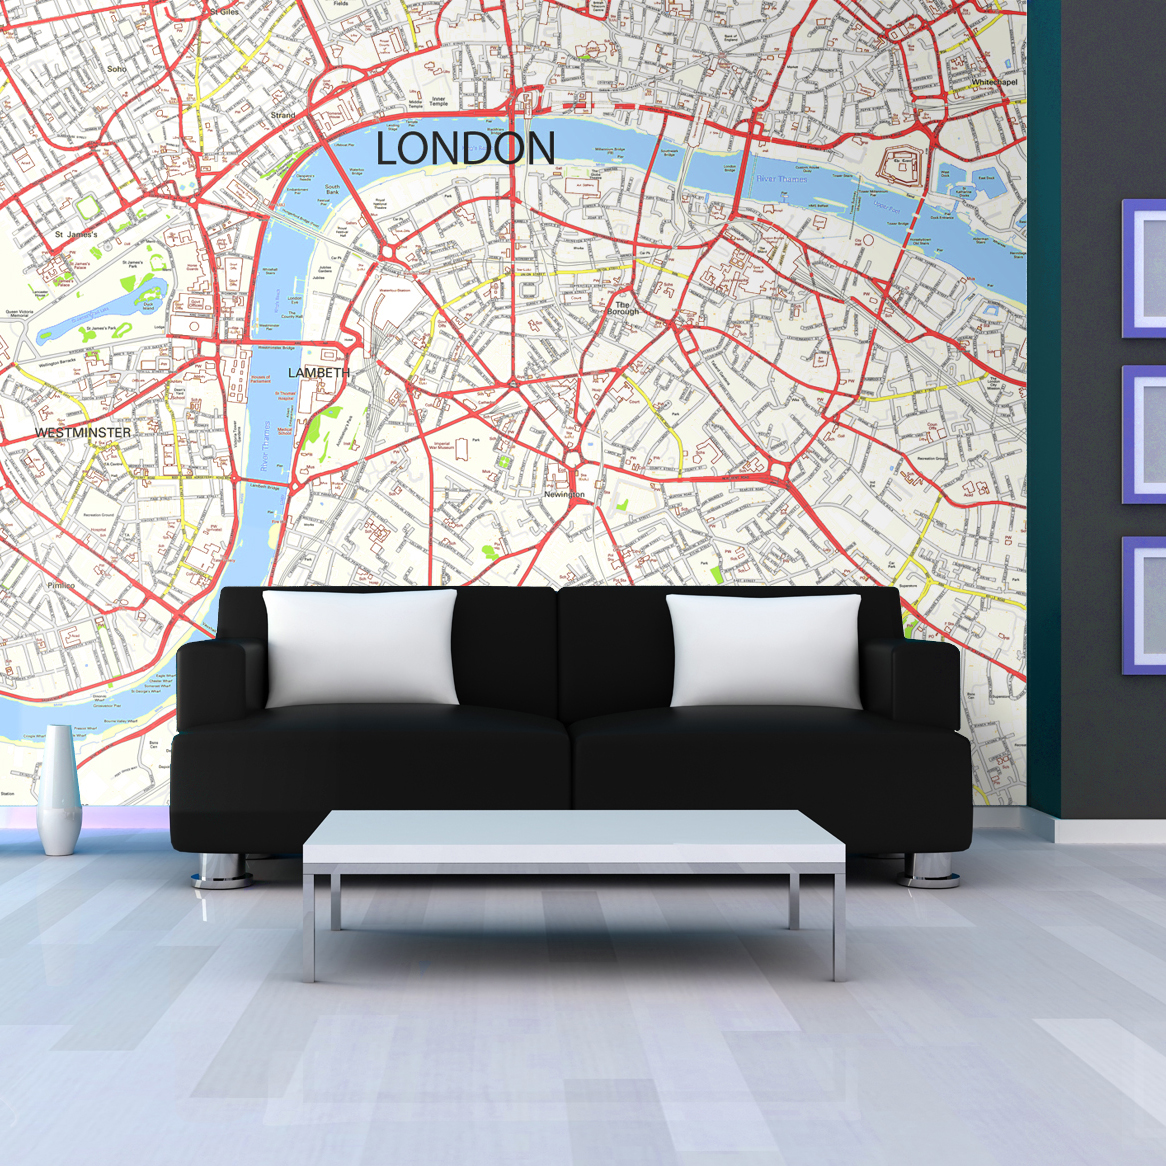 London Street Map Wallpaper Pre Pasted Enhance Your Rooms